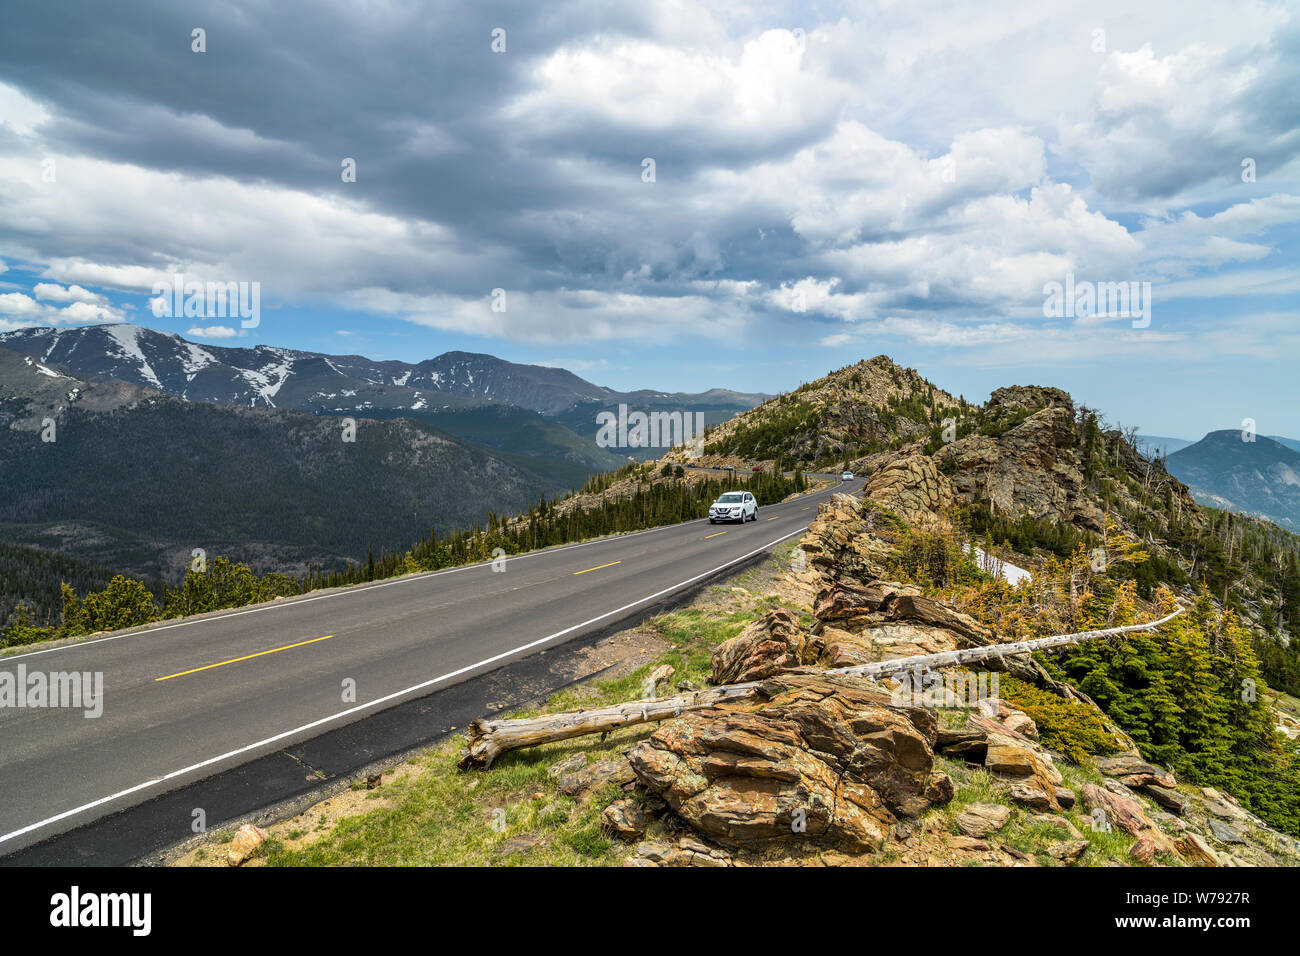 Trail Ridge Road - A stormy Spring day view of a narrow section of Trail Ridge Road winding at top of mountains. Rocky Mountain National Park, CO, USA. Stock Photo